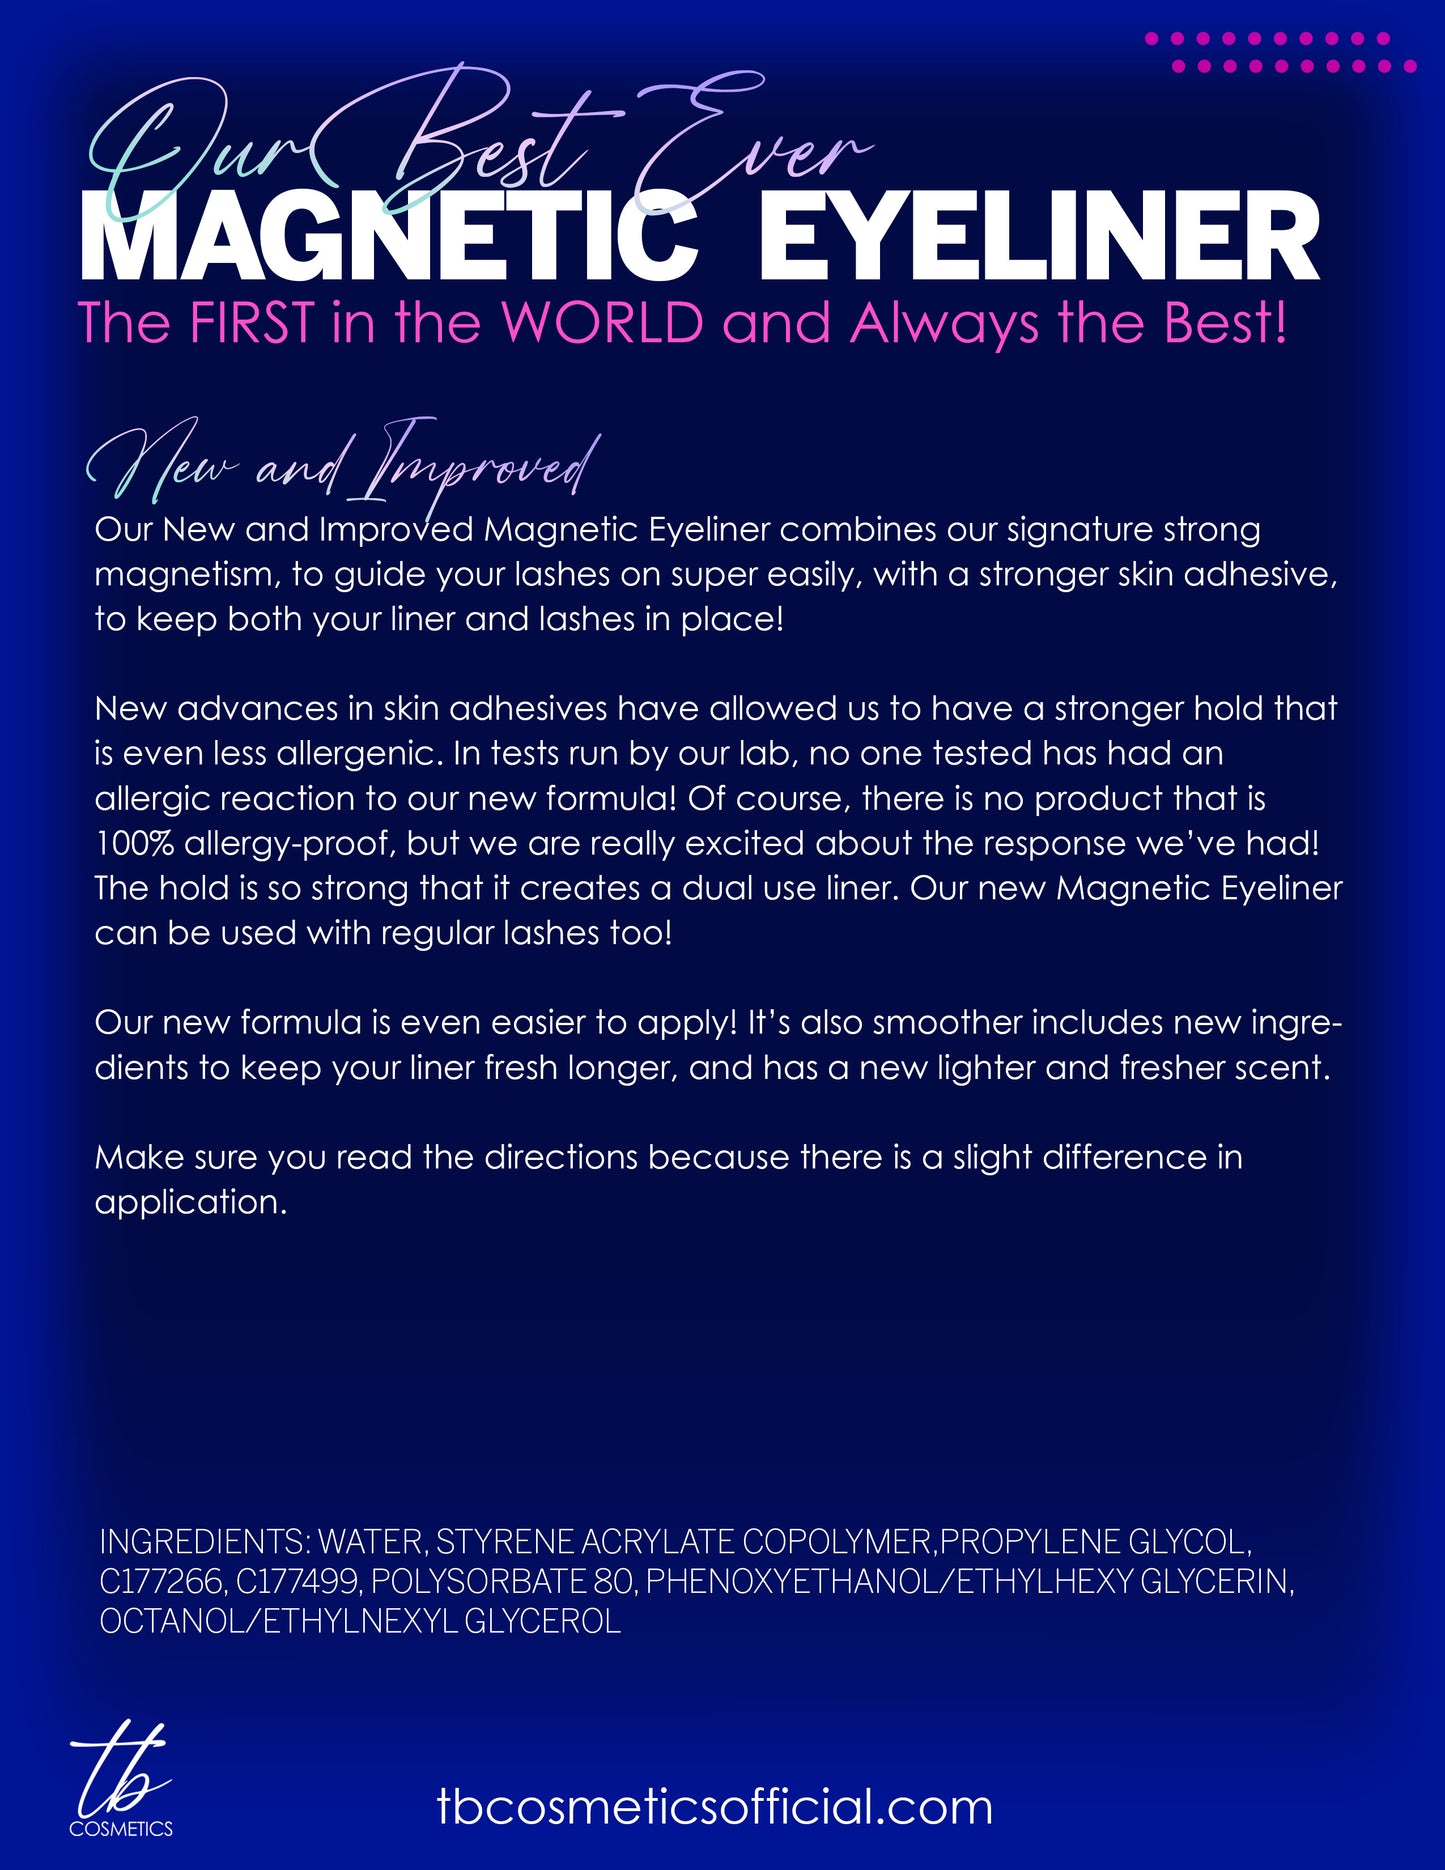 Magnetic Eyeliner - New and Improved